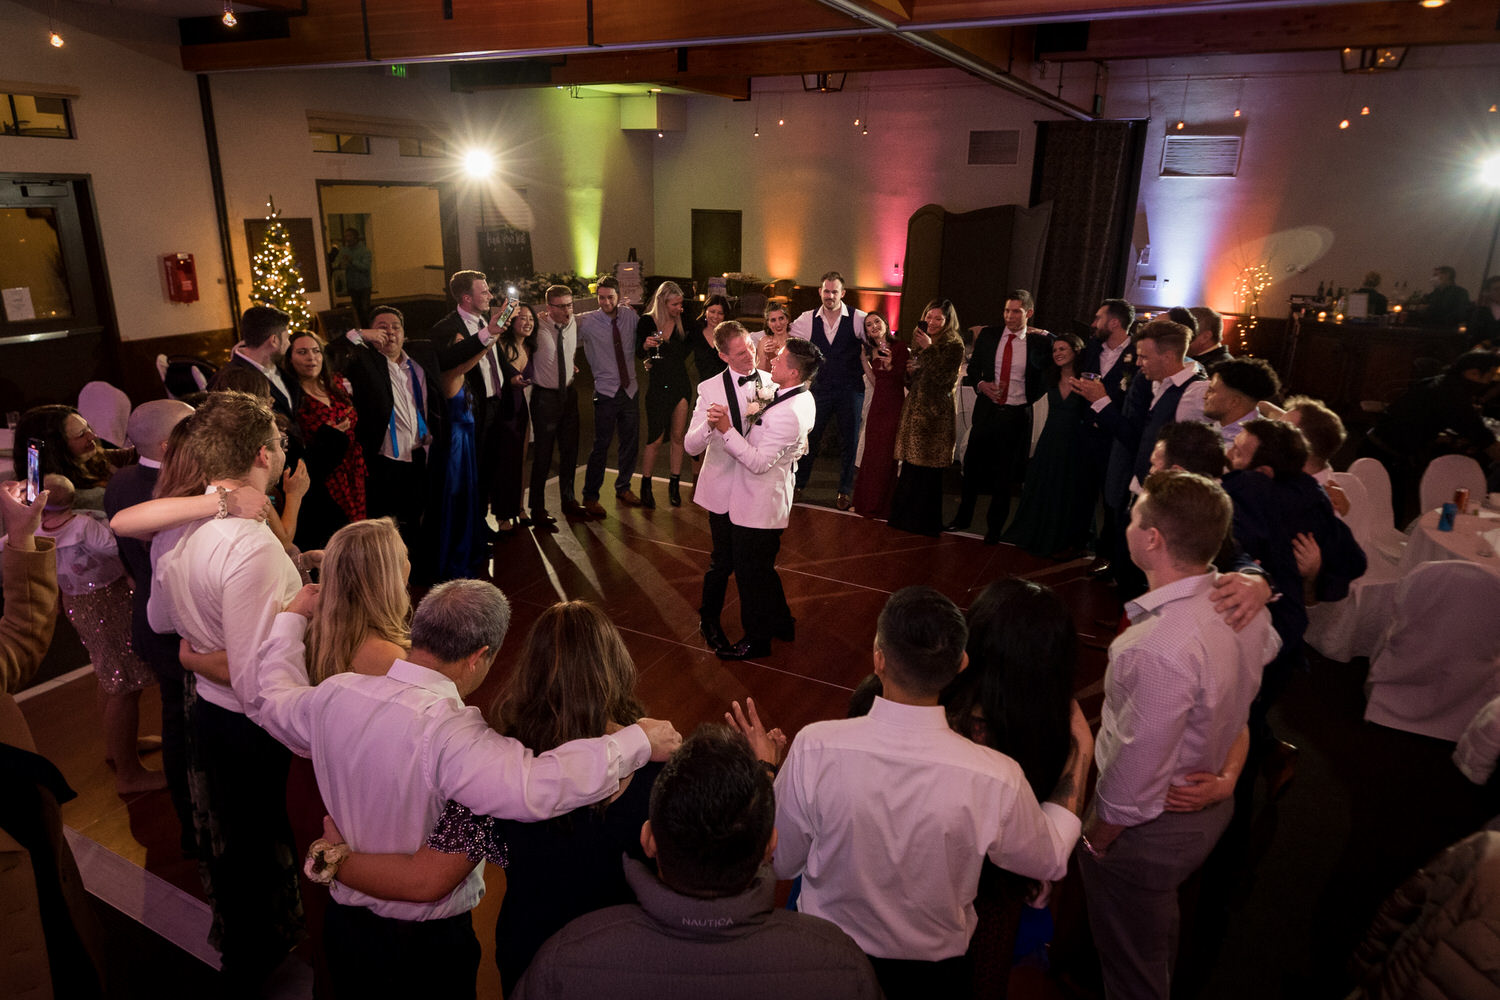 Friends and family surround two grooms on the dance floor at the Mountain Room.